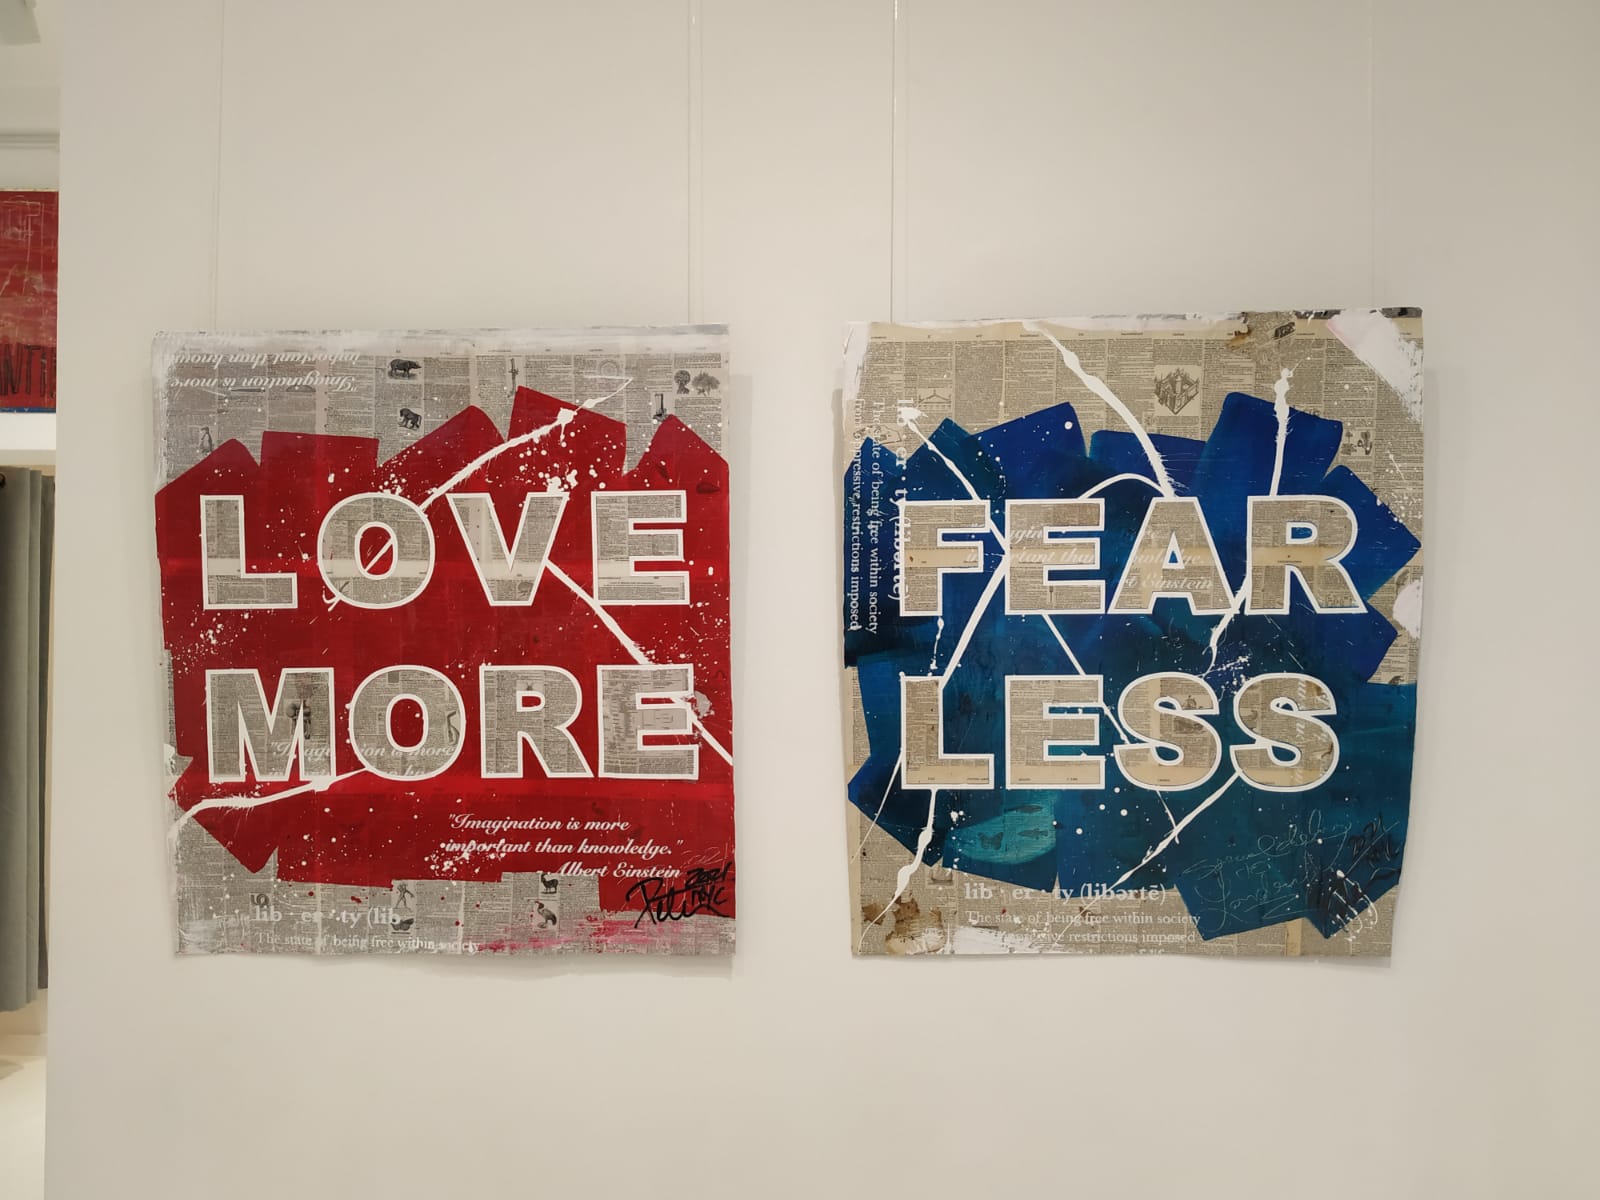 Fear Less and Love More by Peter Tunney.